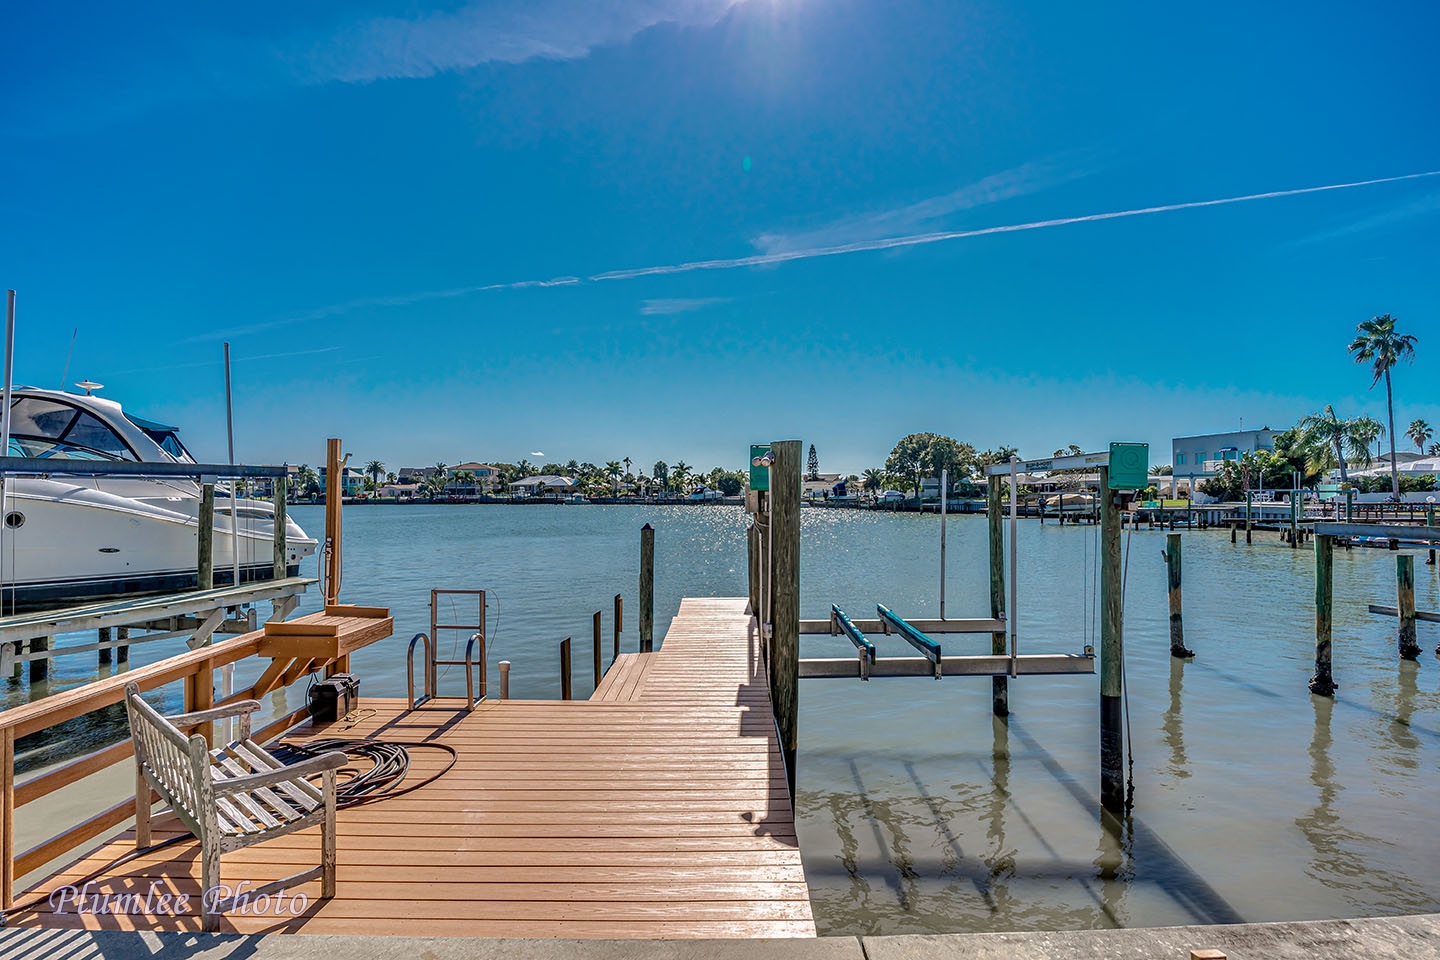 Relax or fish from your backyard dock